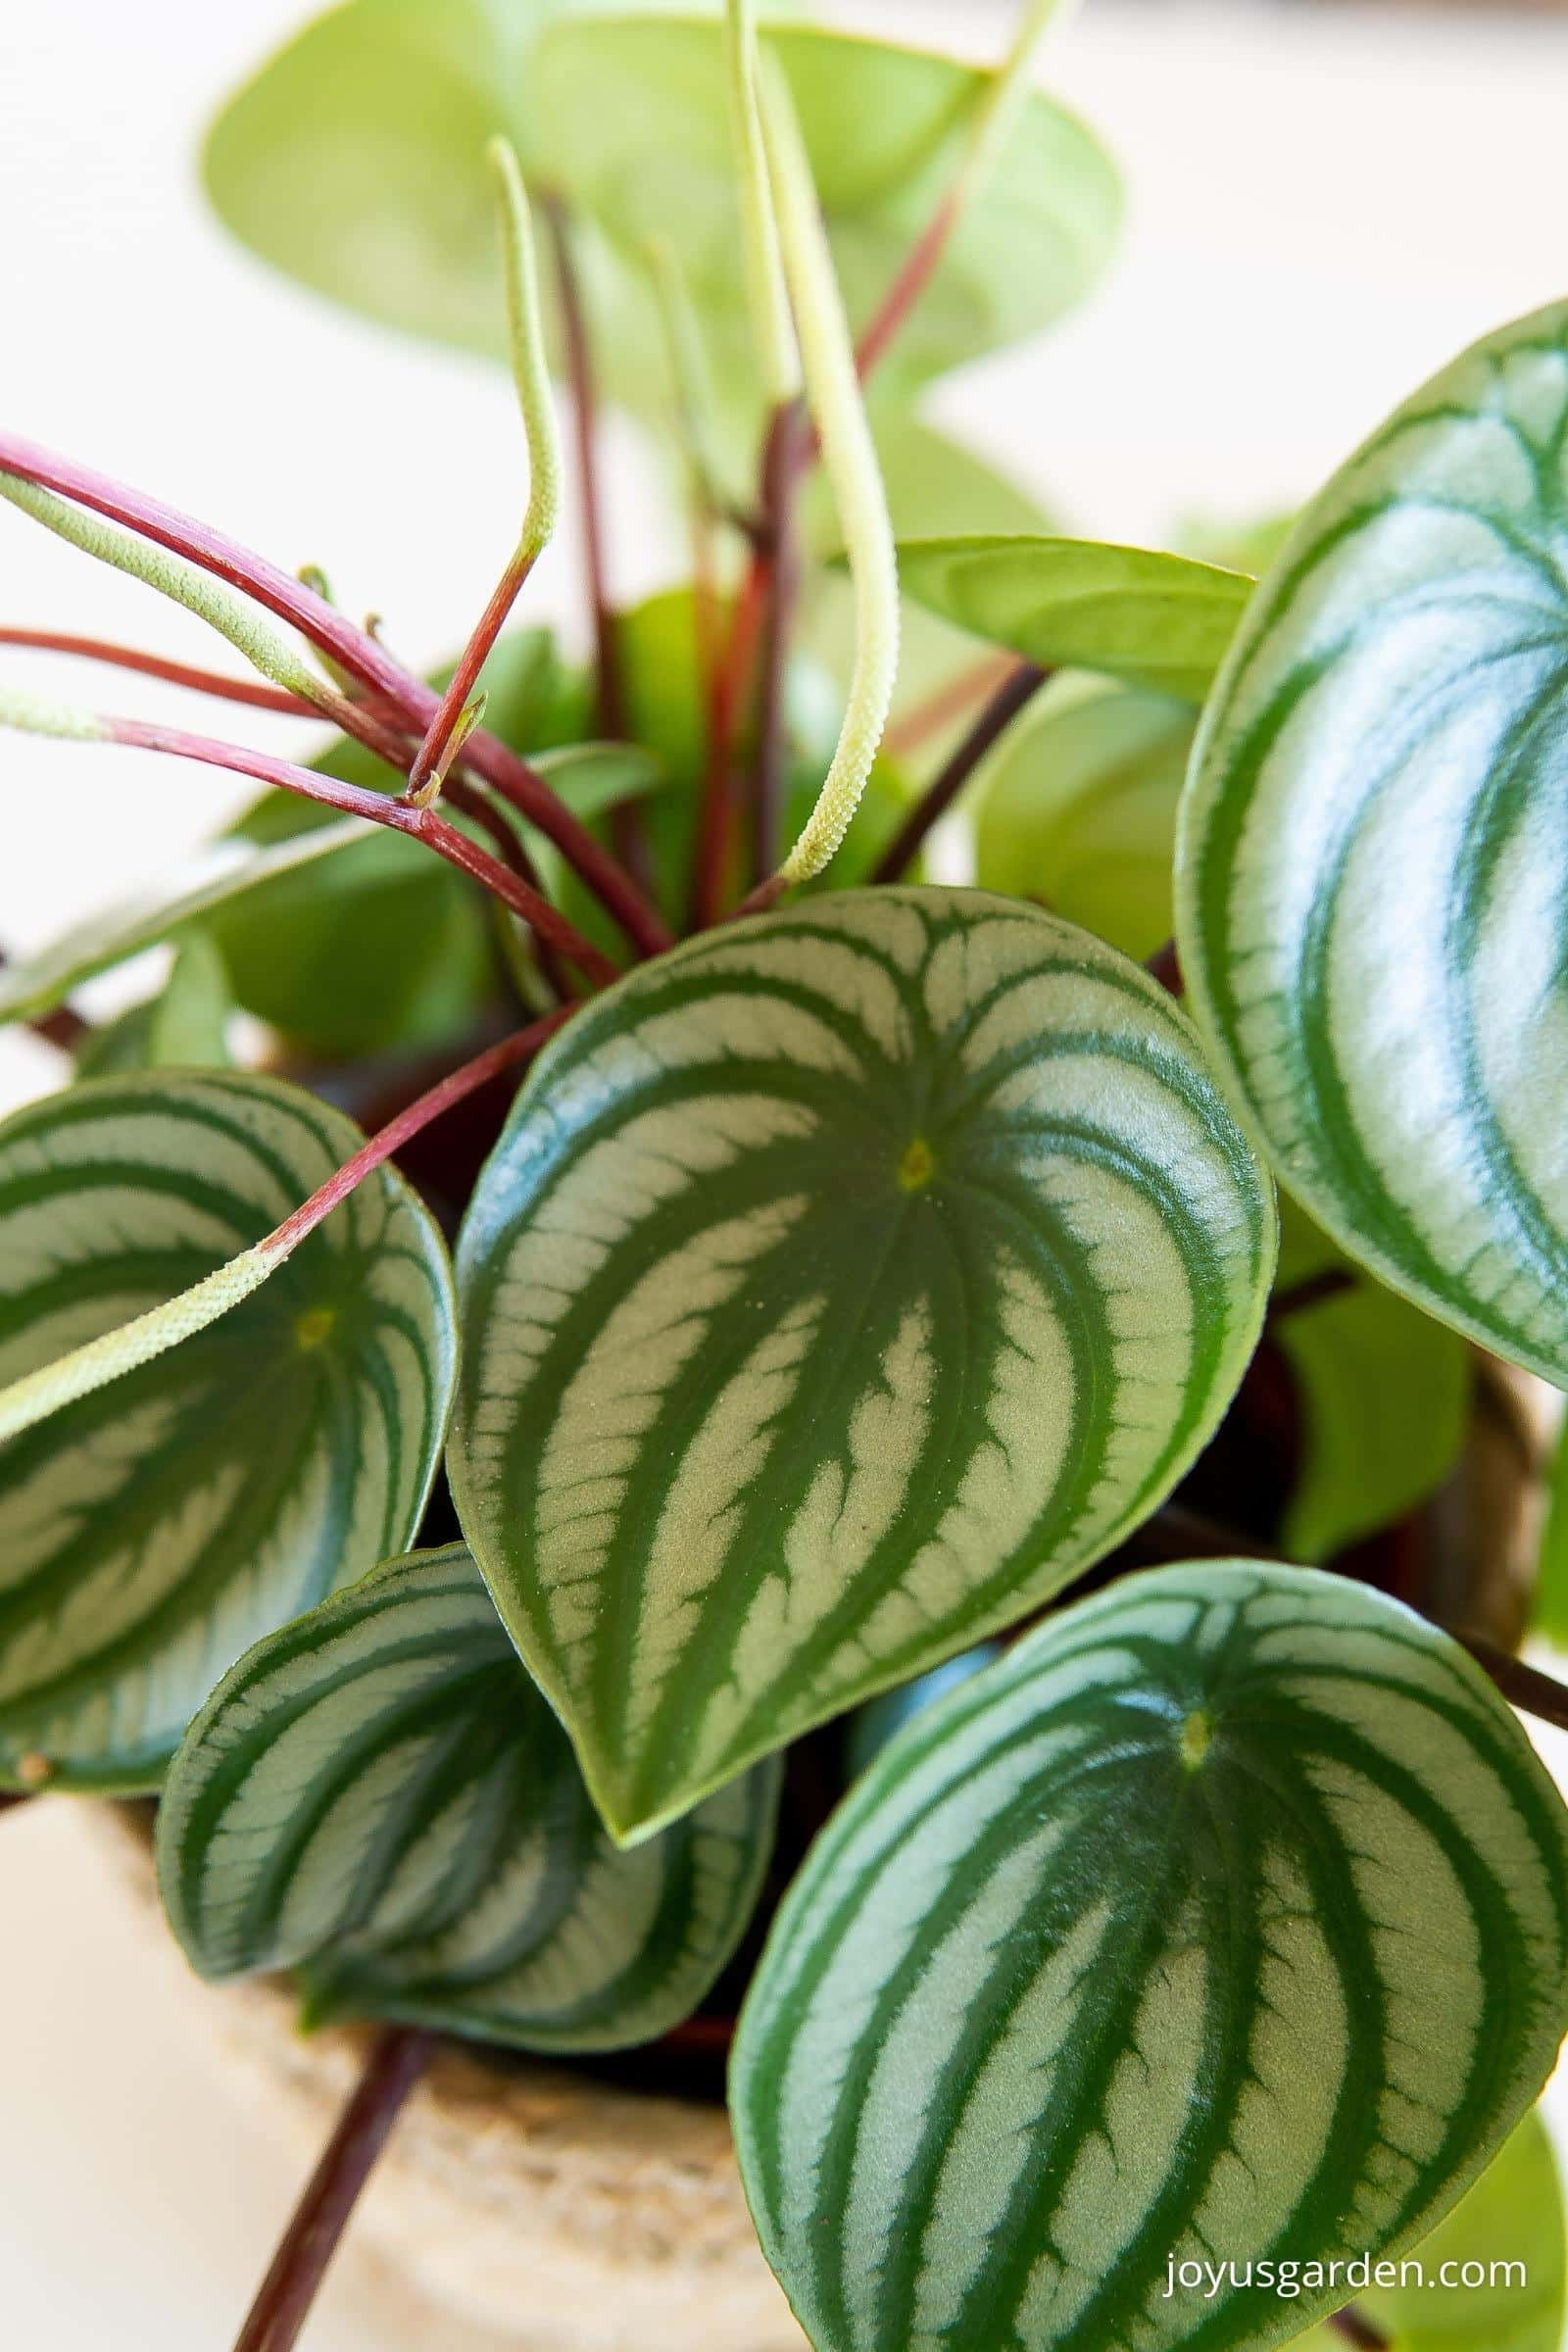 Watermelon Peperomia Care & Growing Tips